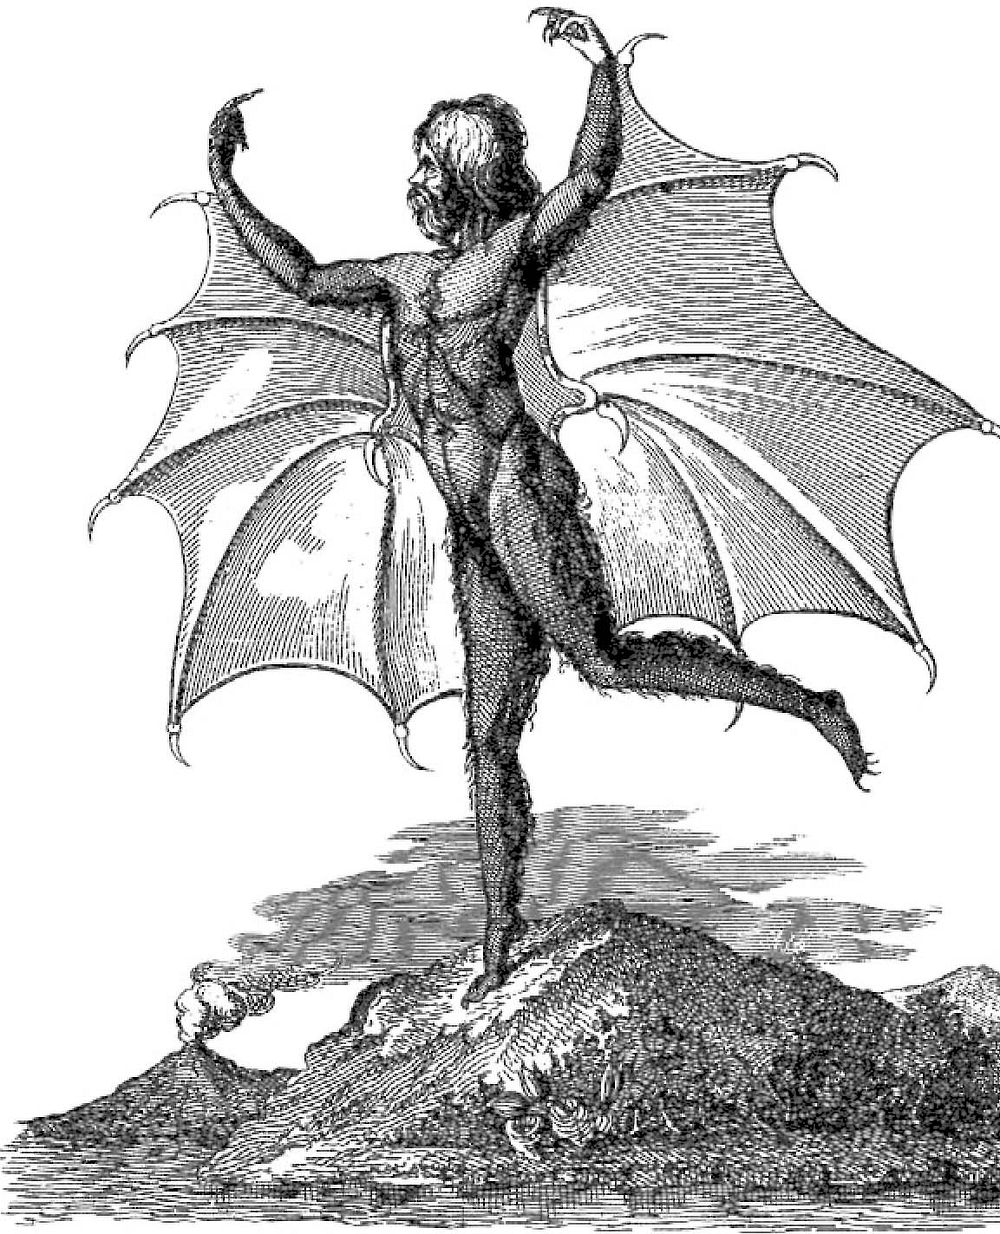 Portrait of a man-bat (Vespertilio-homo), from an edition of the moon series published in Naples. (Courtesy of the New York…